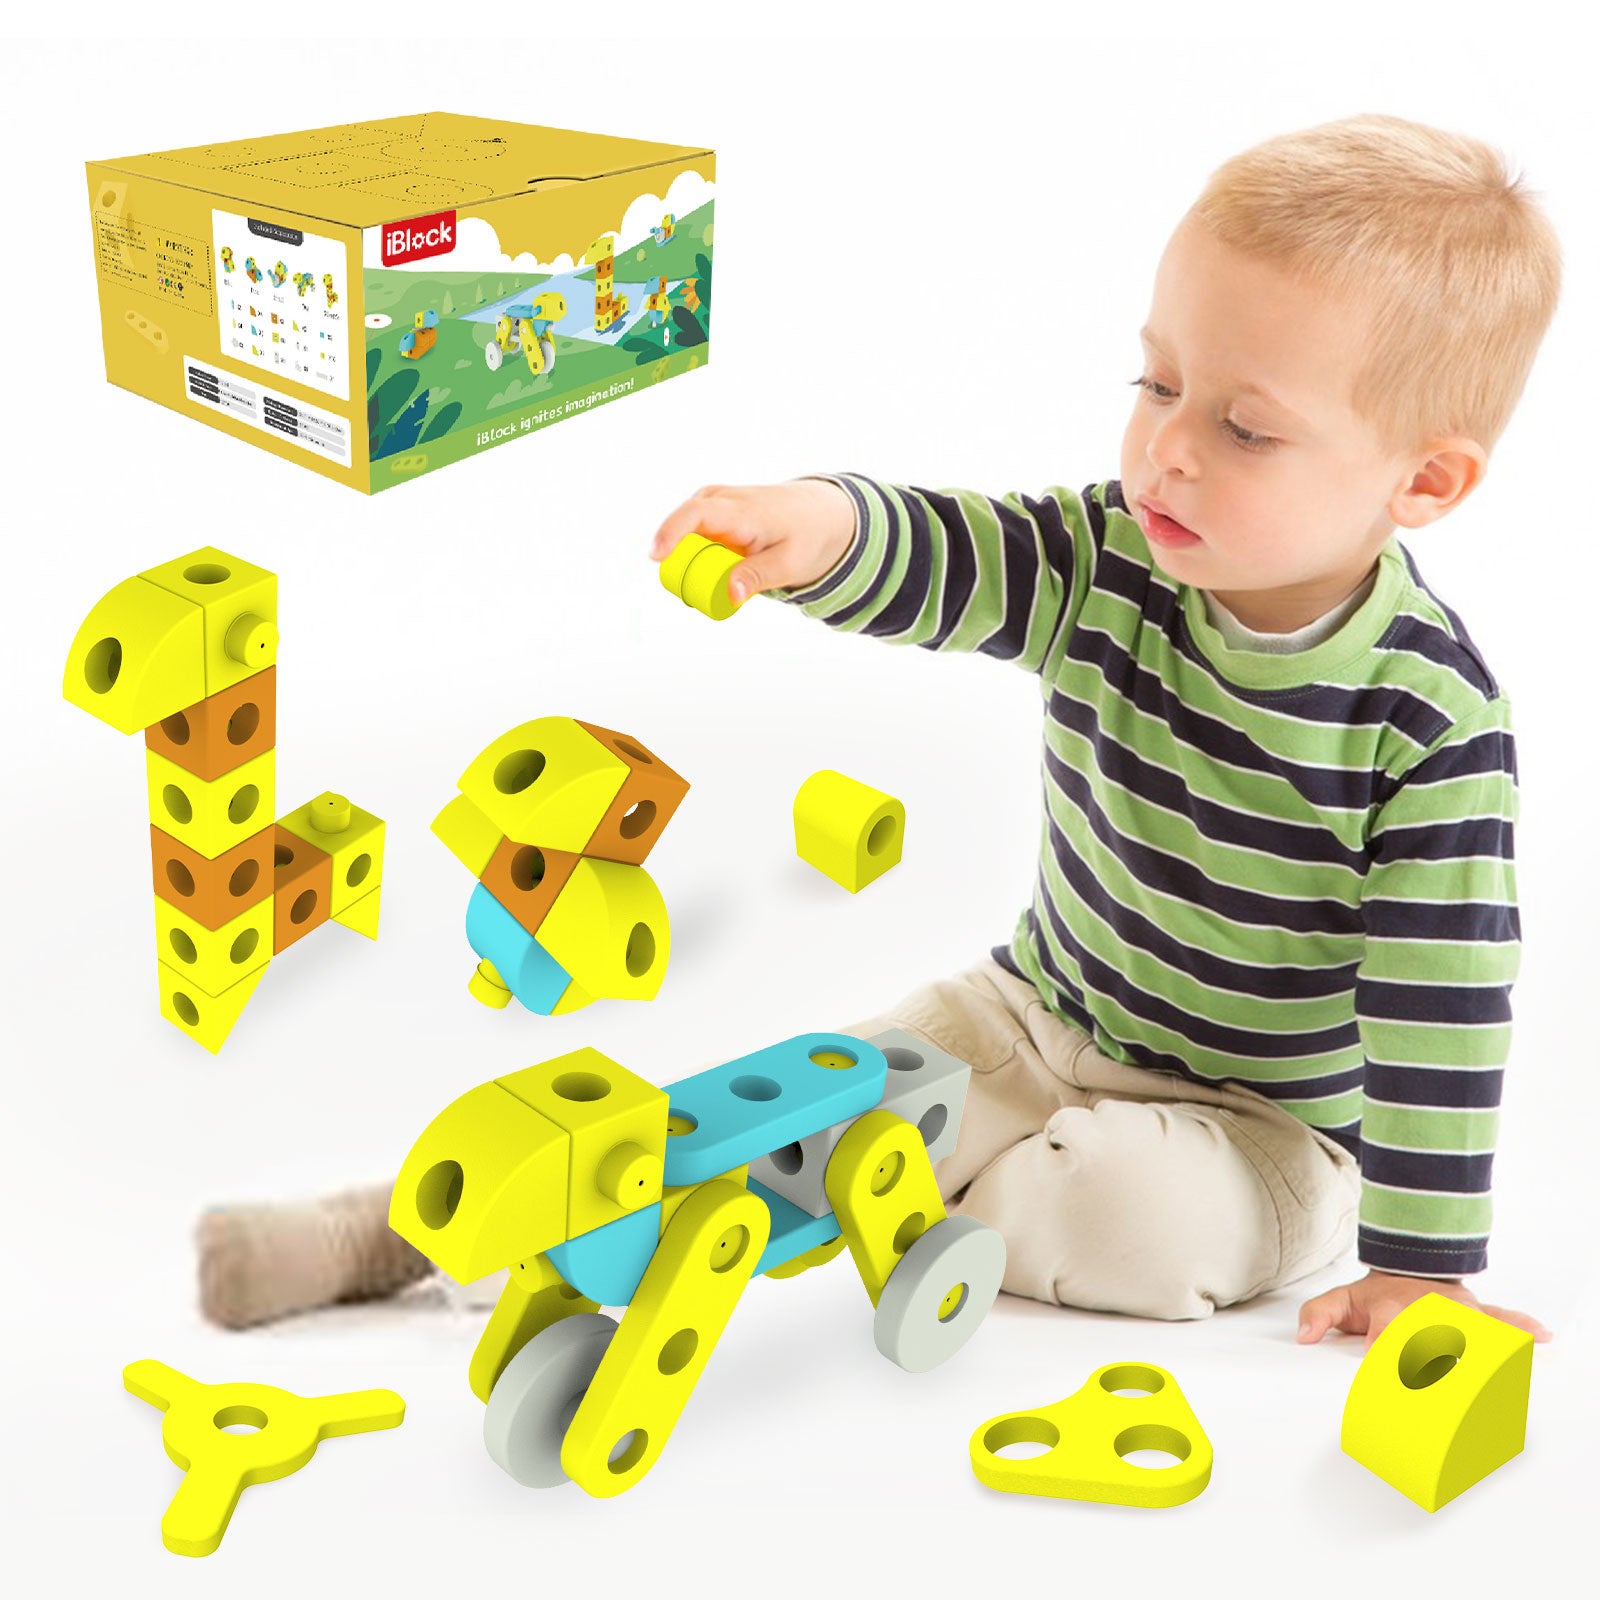 Life Size Construction & Building Play Sets for Kids